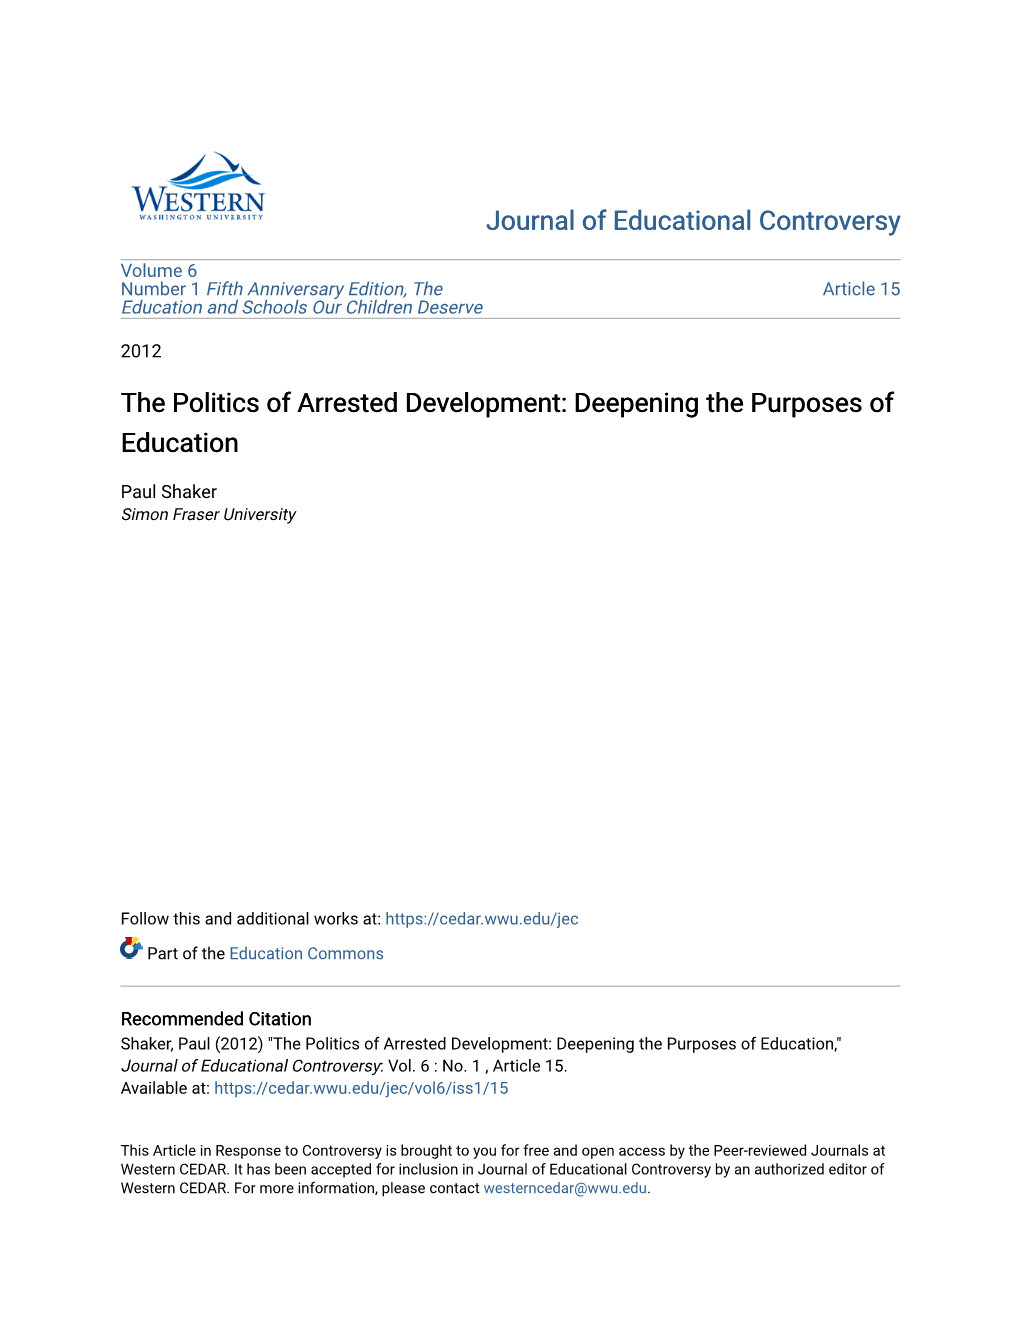 The Politics of Arrested Development: Deepening the Purposes of Education